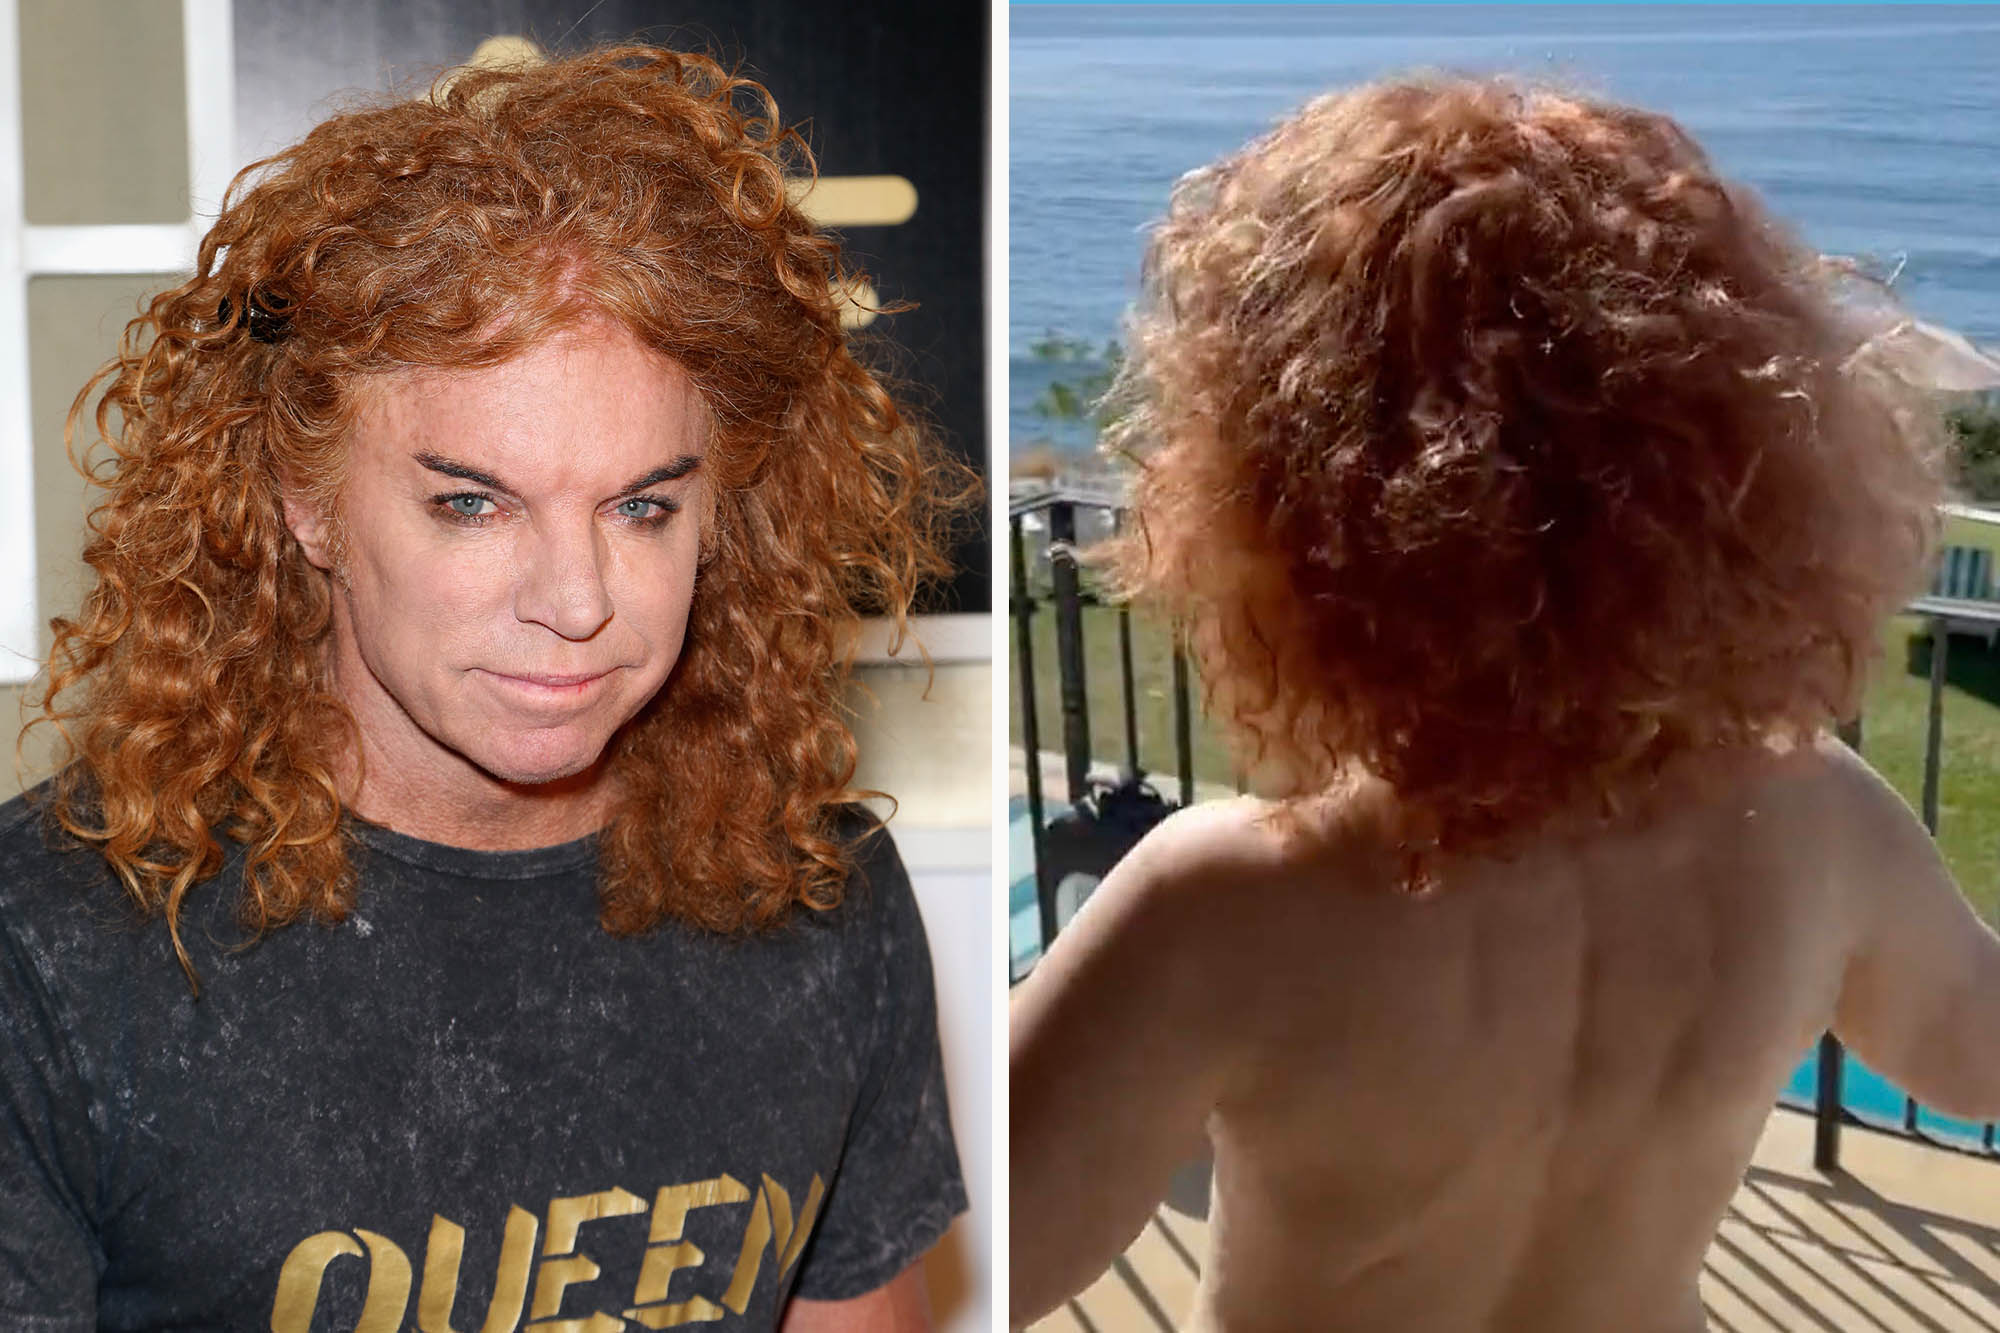 Carrot Top video going viral but it's really Kathy Griffin